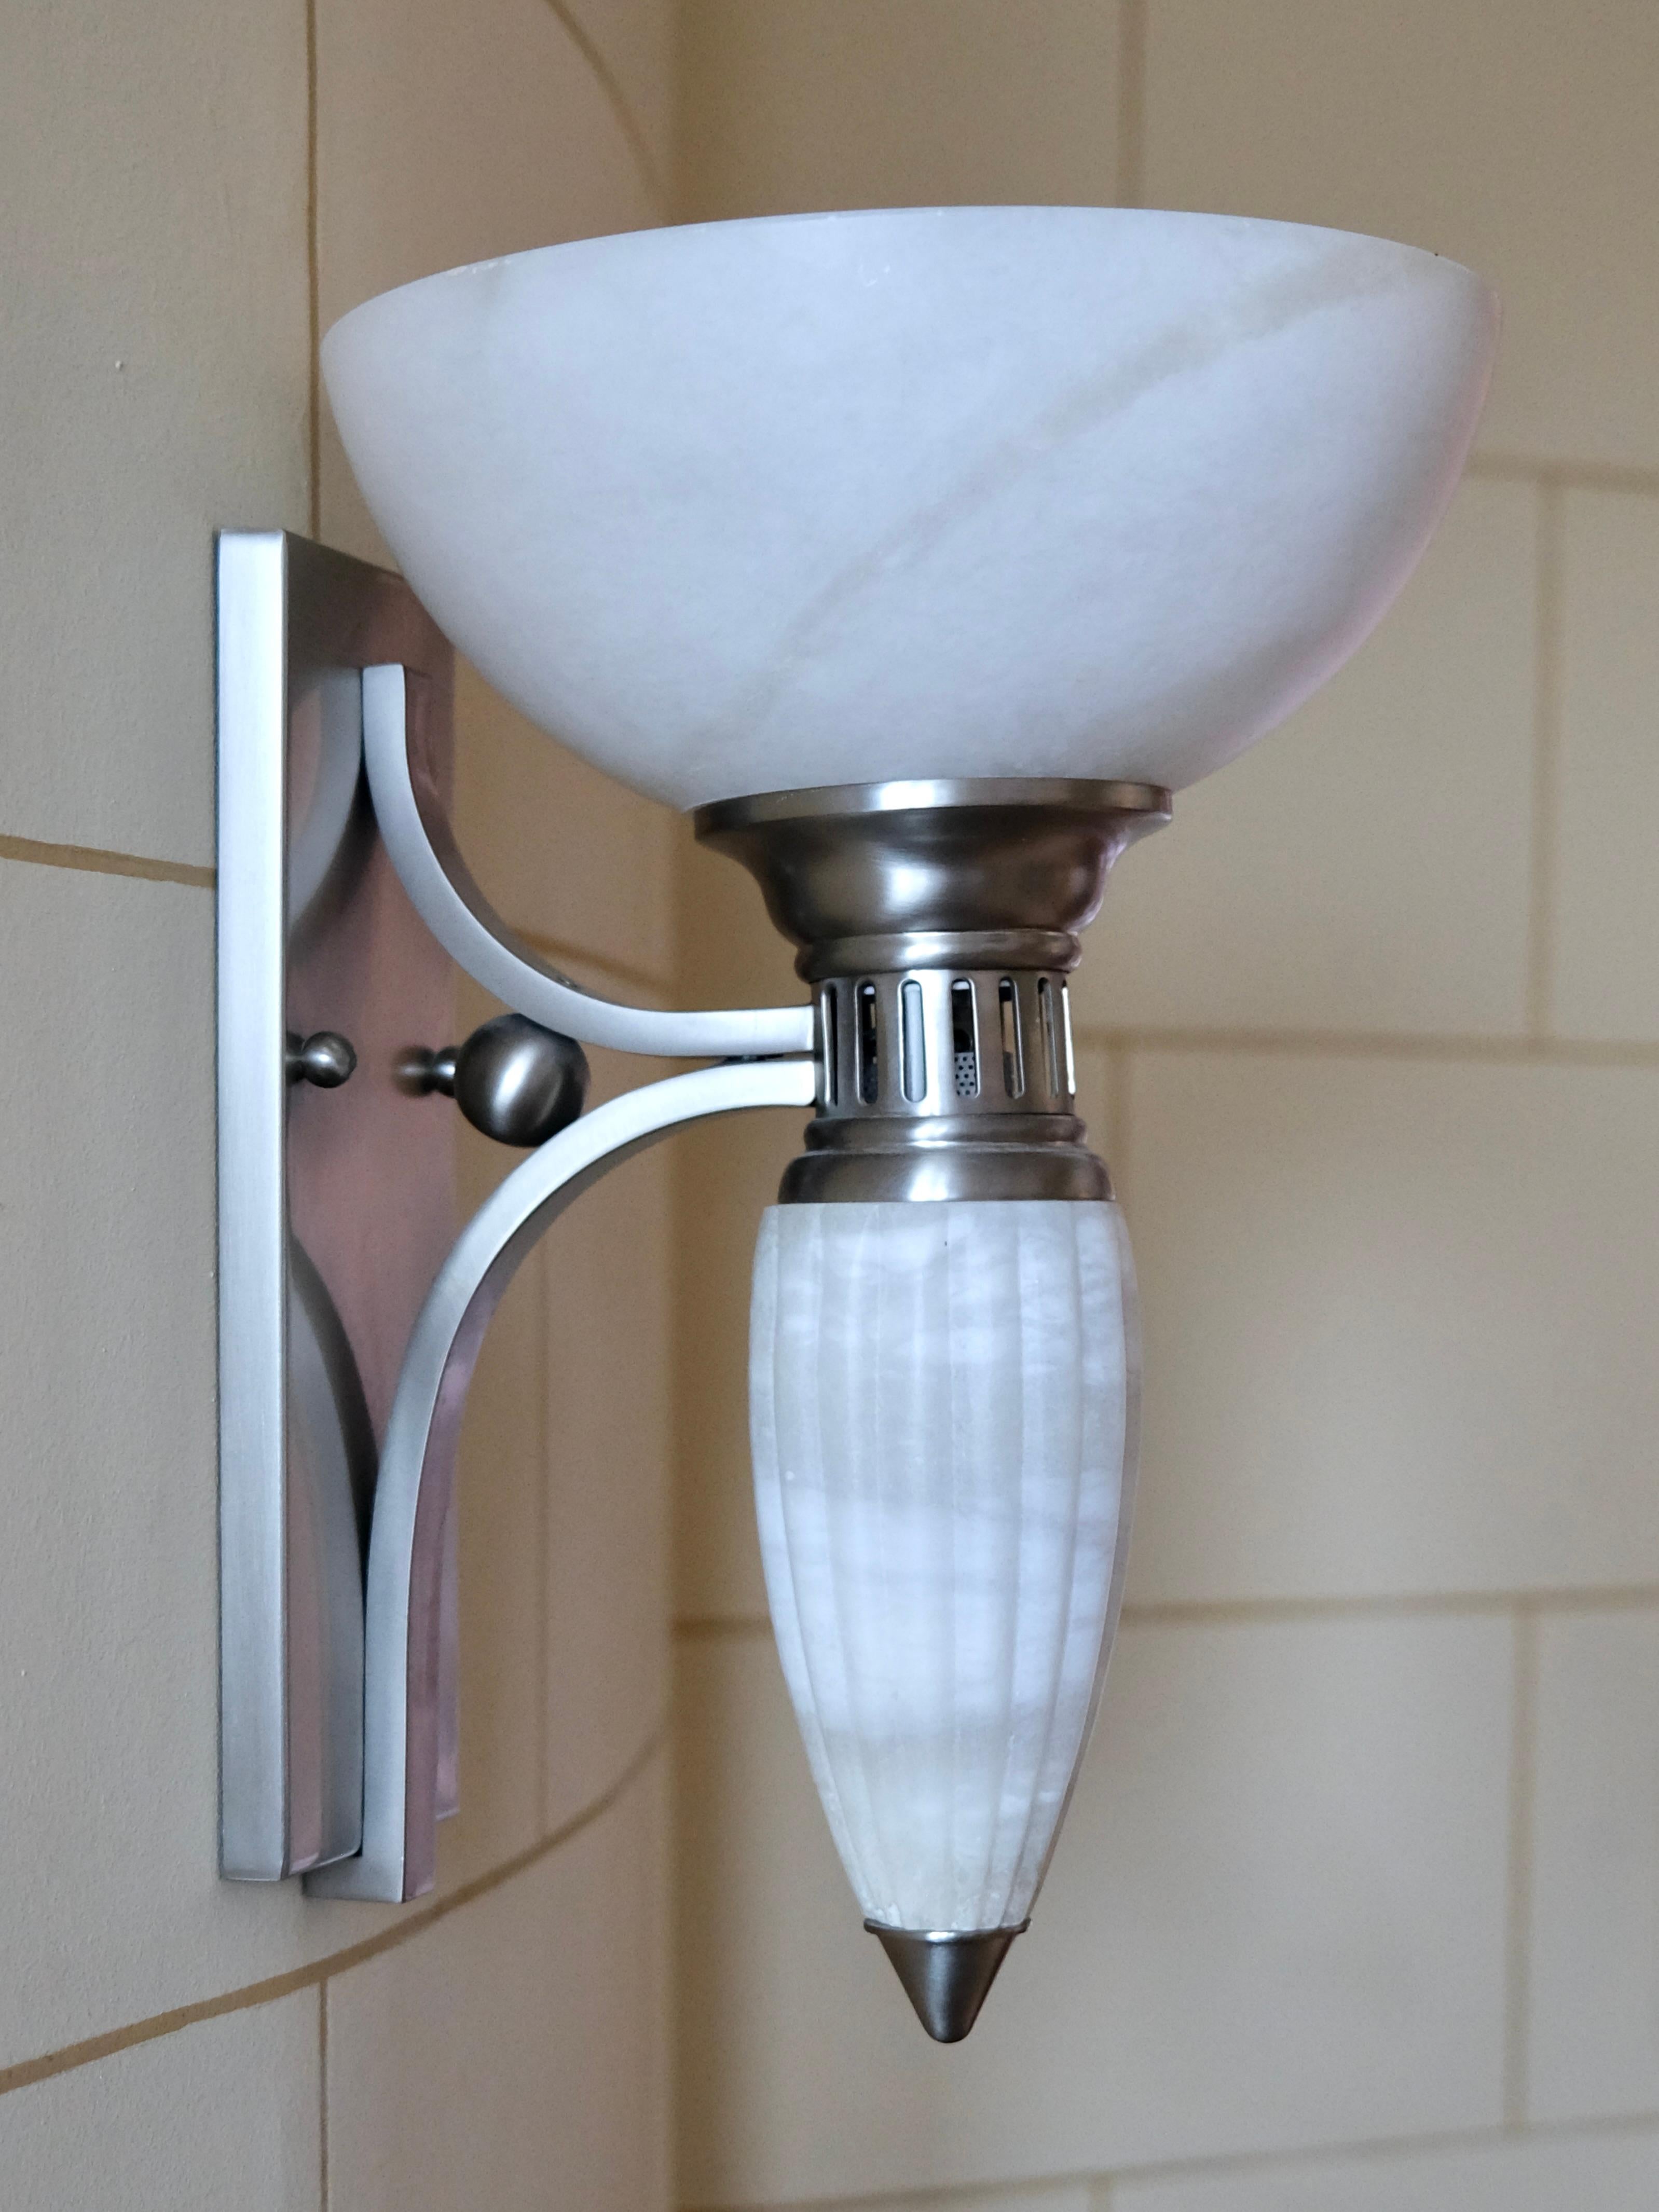 Set of 2 Art Deco Style Wall Sconces with Alabaster Bowls and Illuminated Cones For Sale 2